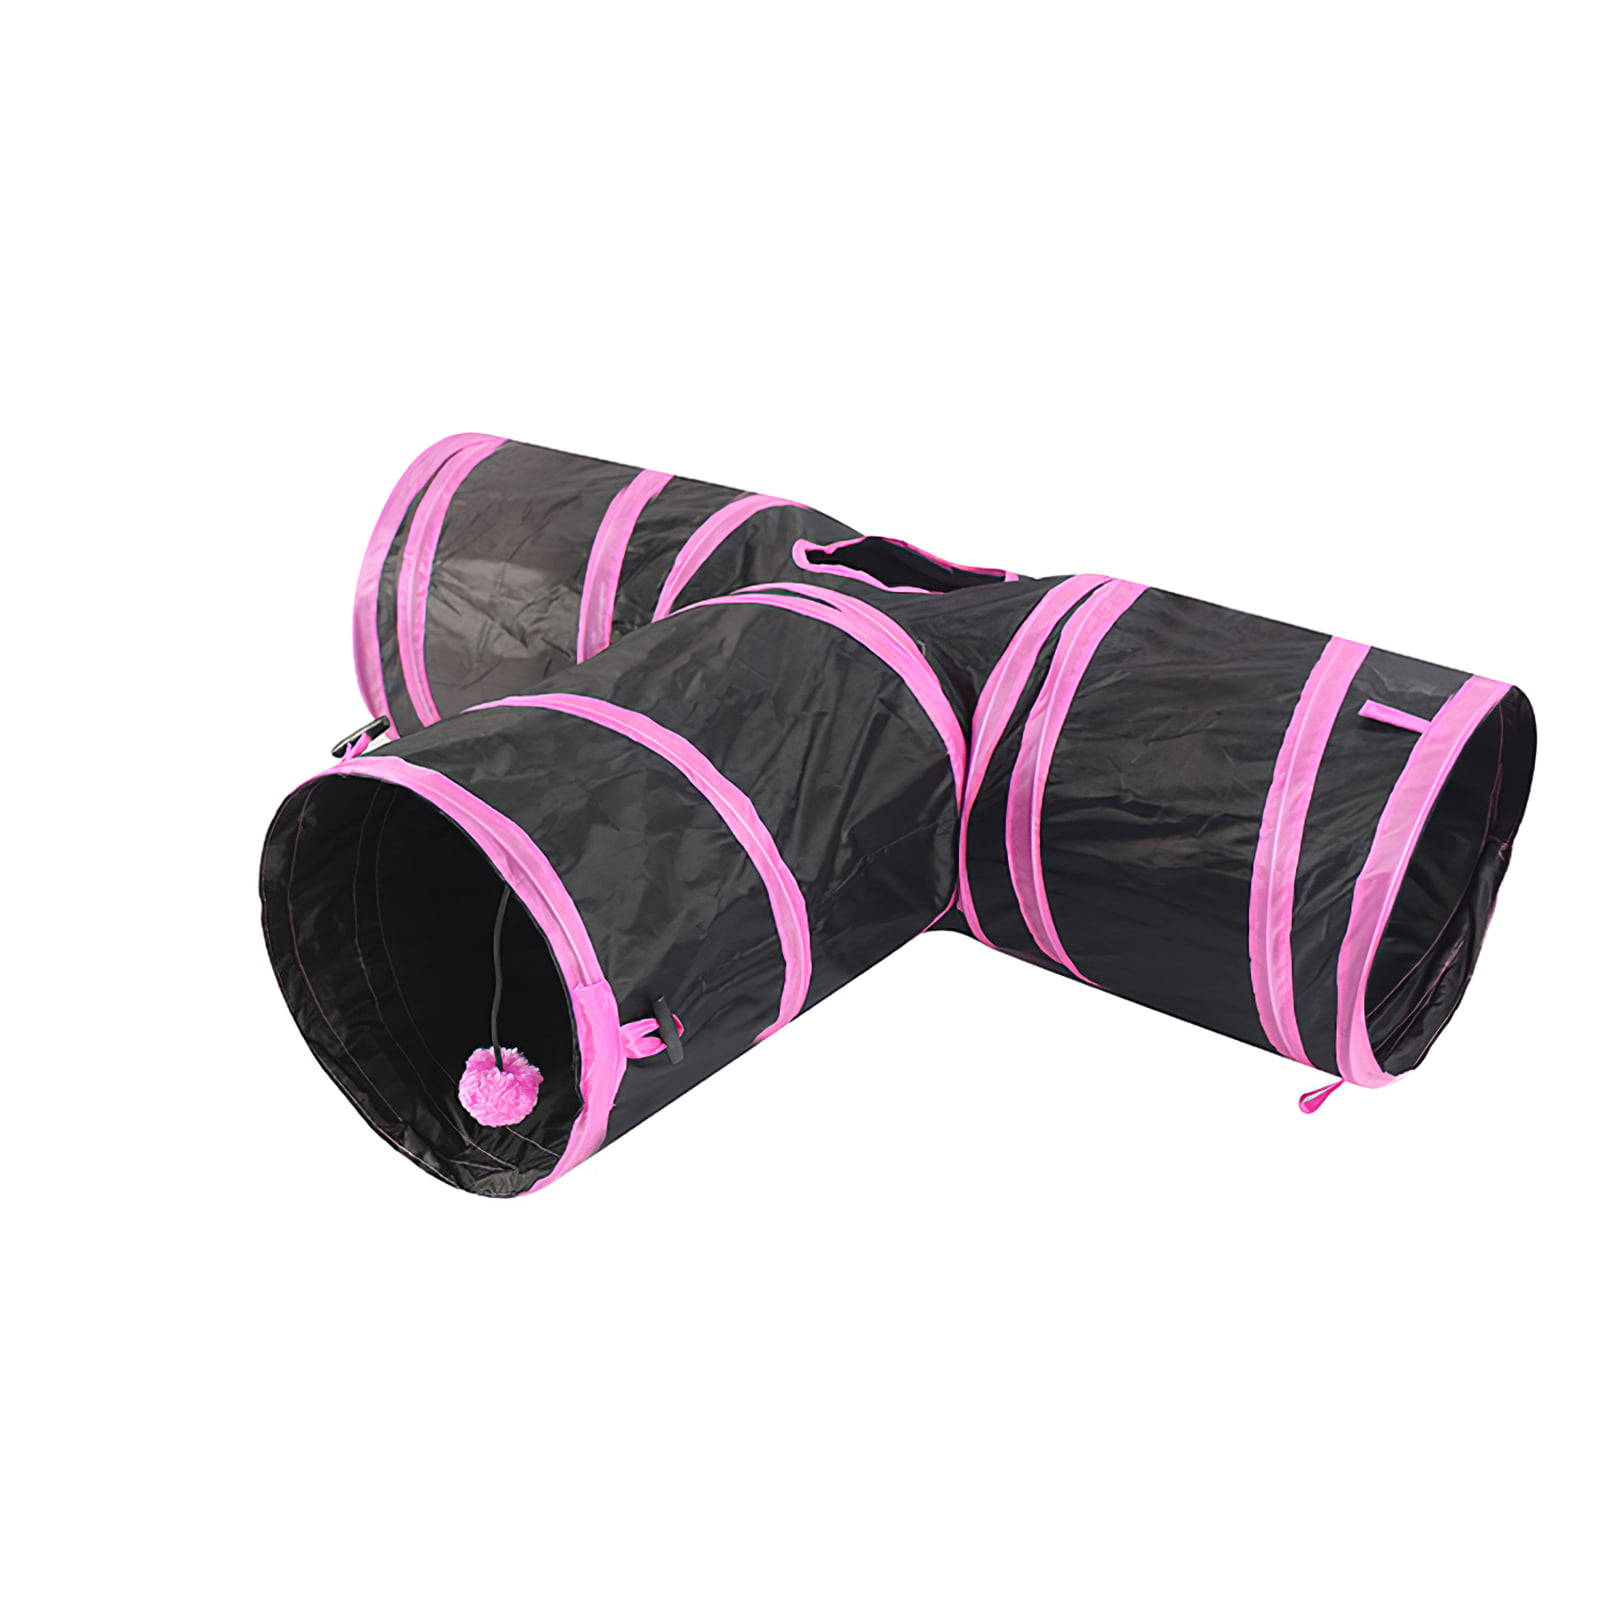 Eyourlife Pet Tunnel Collapsible 3 Way Cat Play Tunnel Pet Tube Toy for Rabbits Kittens,Dogs 